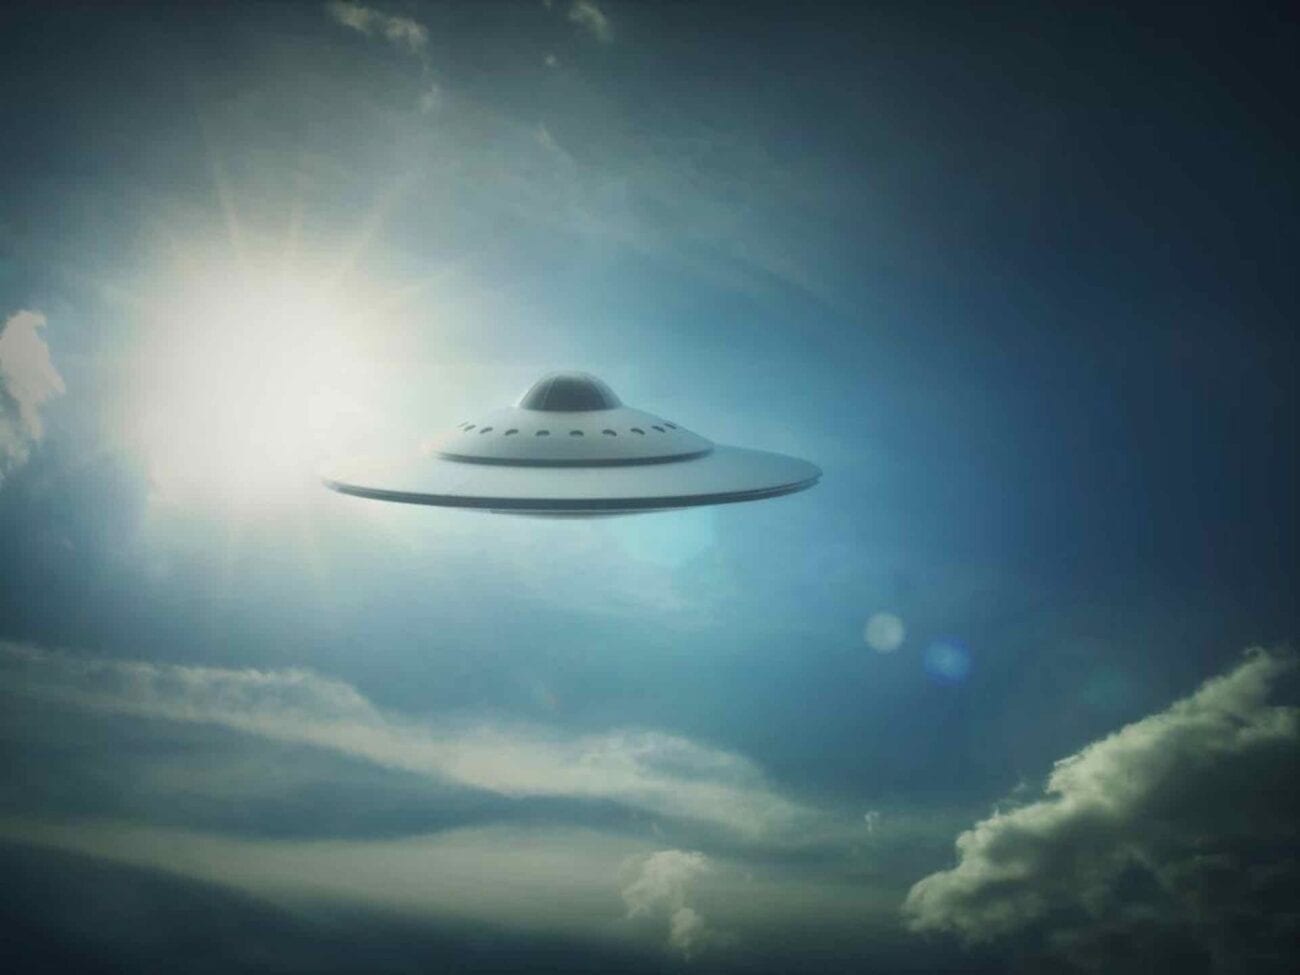 Wondering whether UFOs are real? The upcoming documentary 'The Phenomenon' may be the source of information you're looking for.